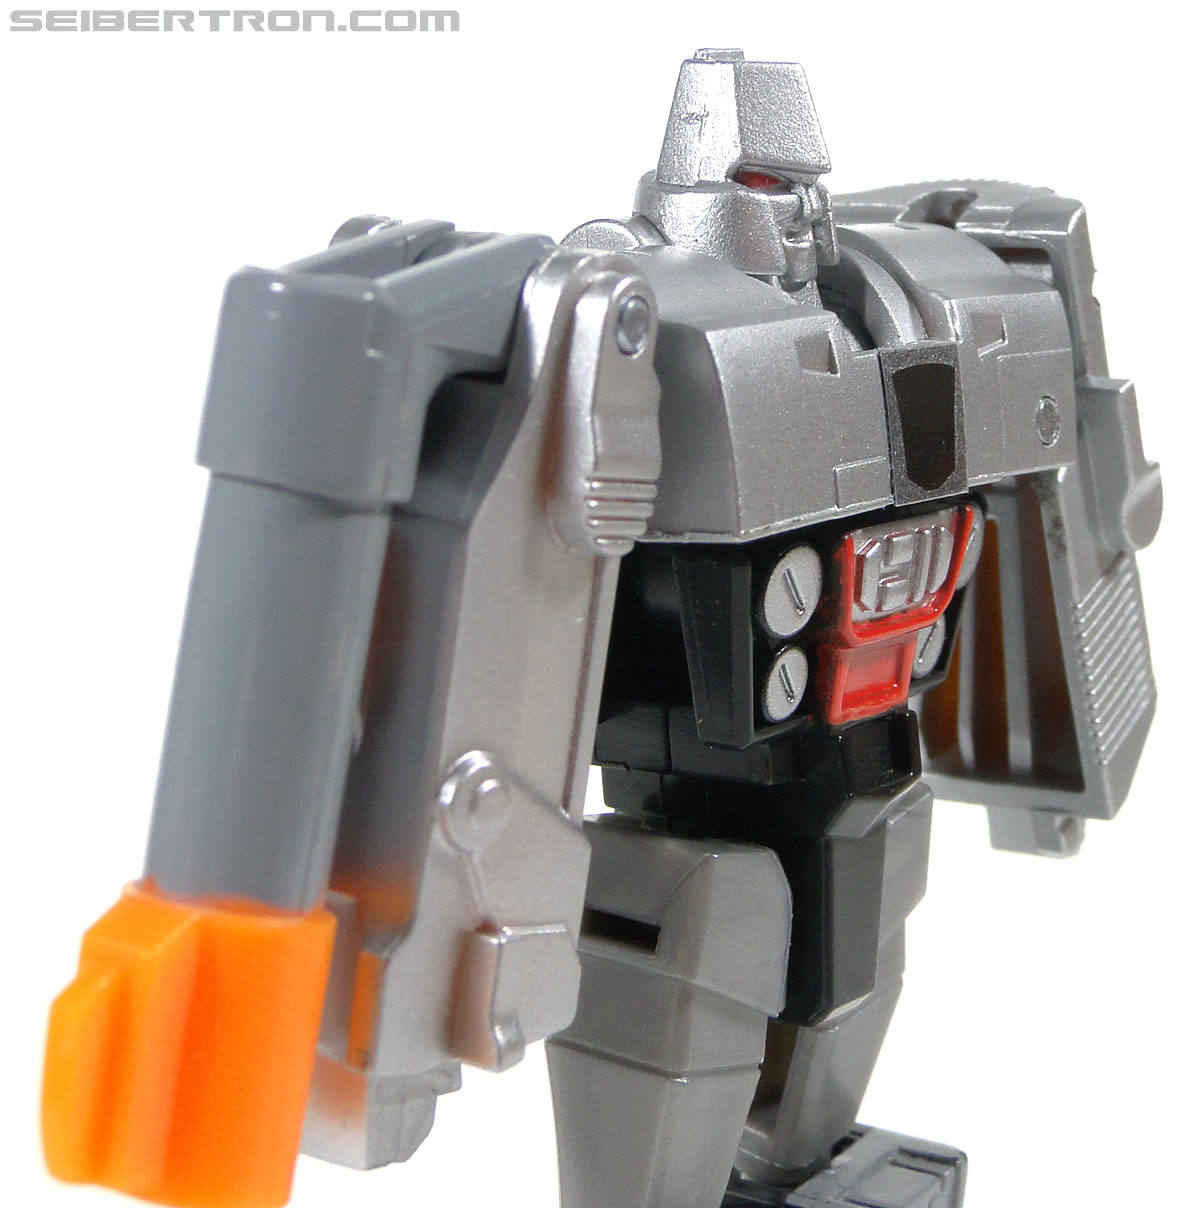 Transformers Reveal The Shield Megatron (Image #50 of 110)